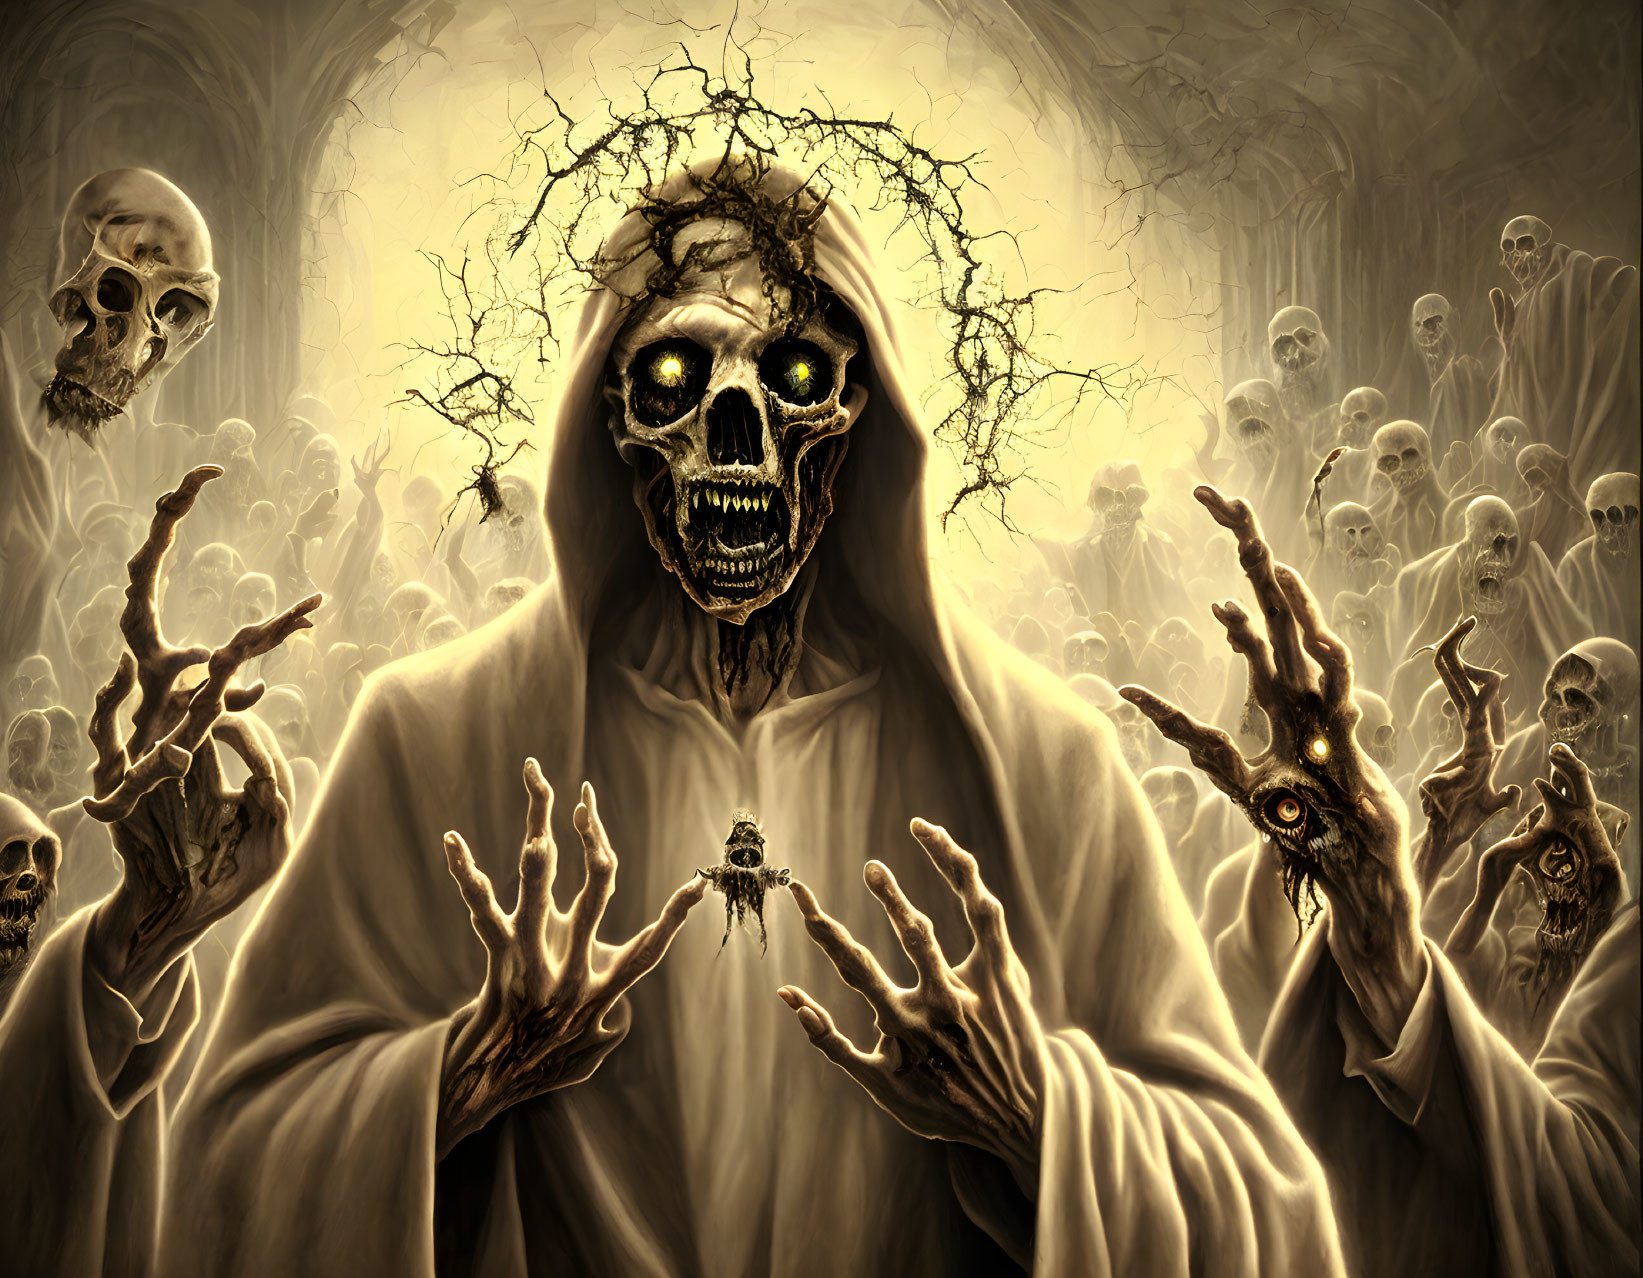 Skull-faced grim reaper surrounded by skulls and skeletal hands in misty setting